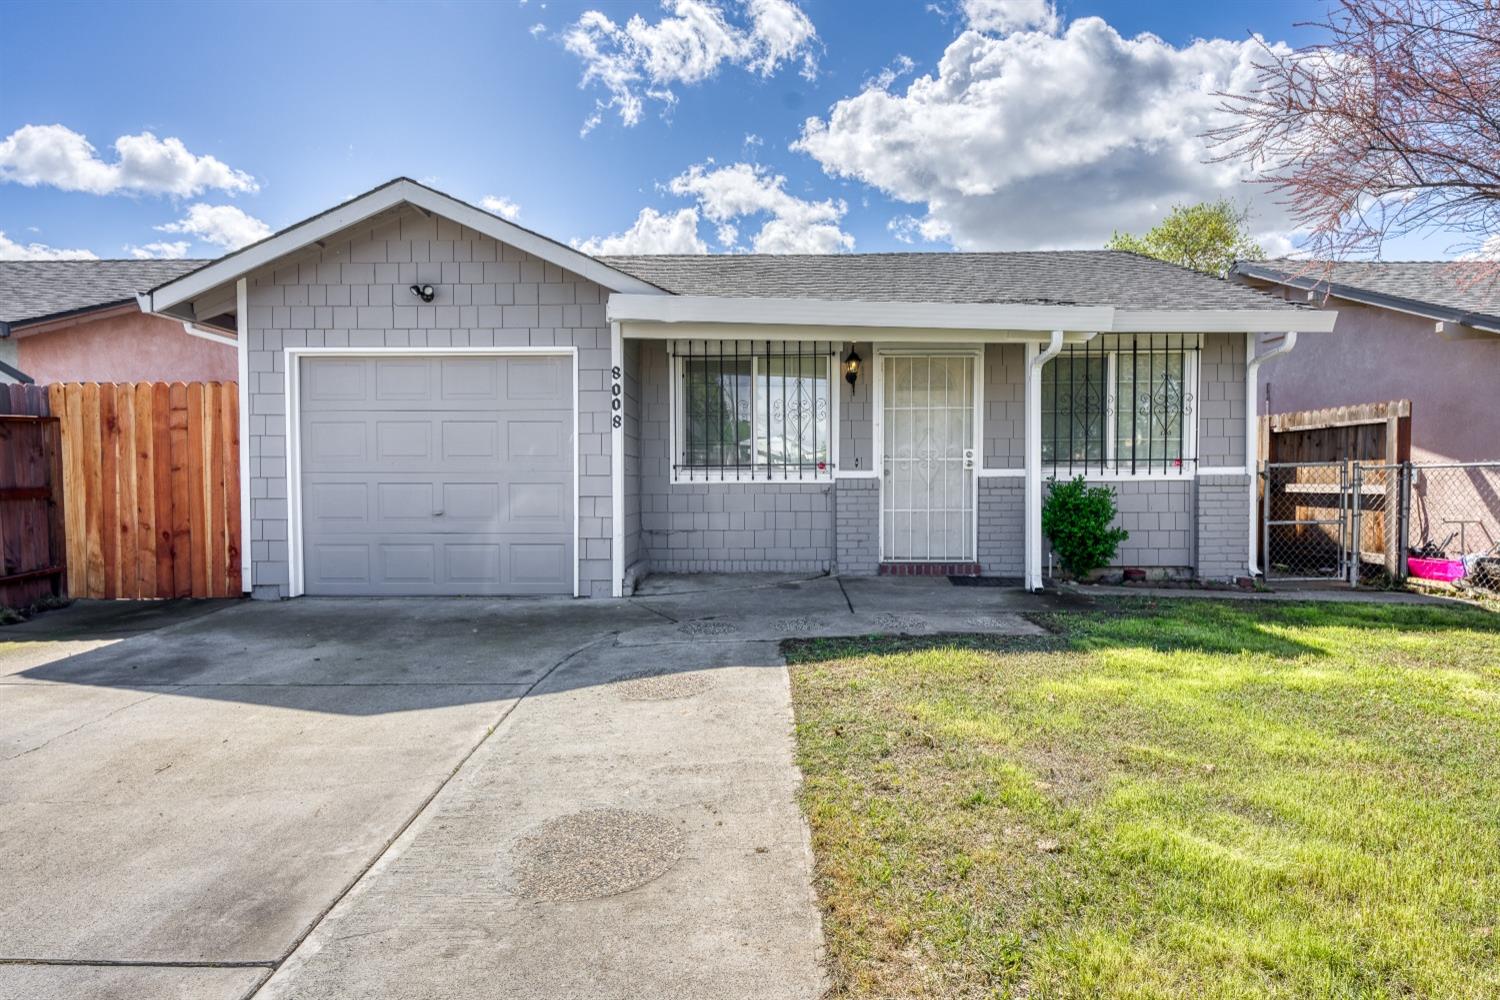 Photo of 8008 32nd Ave in Sacramento, CA